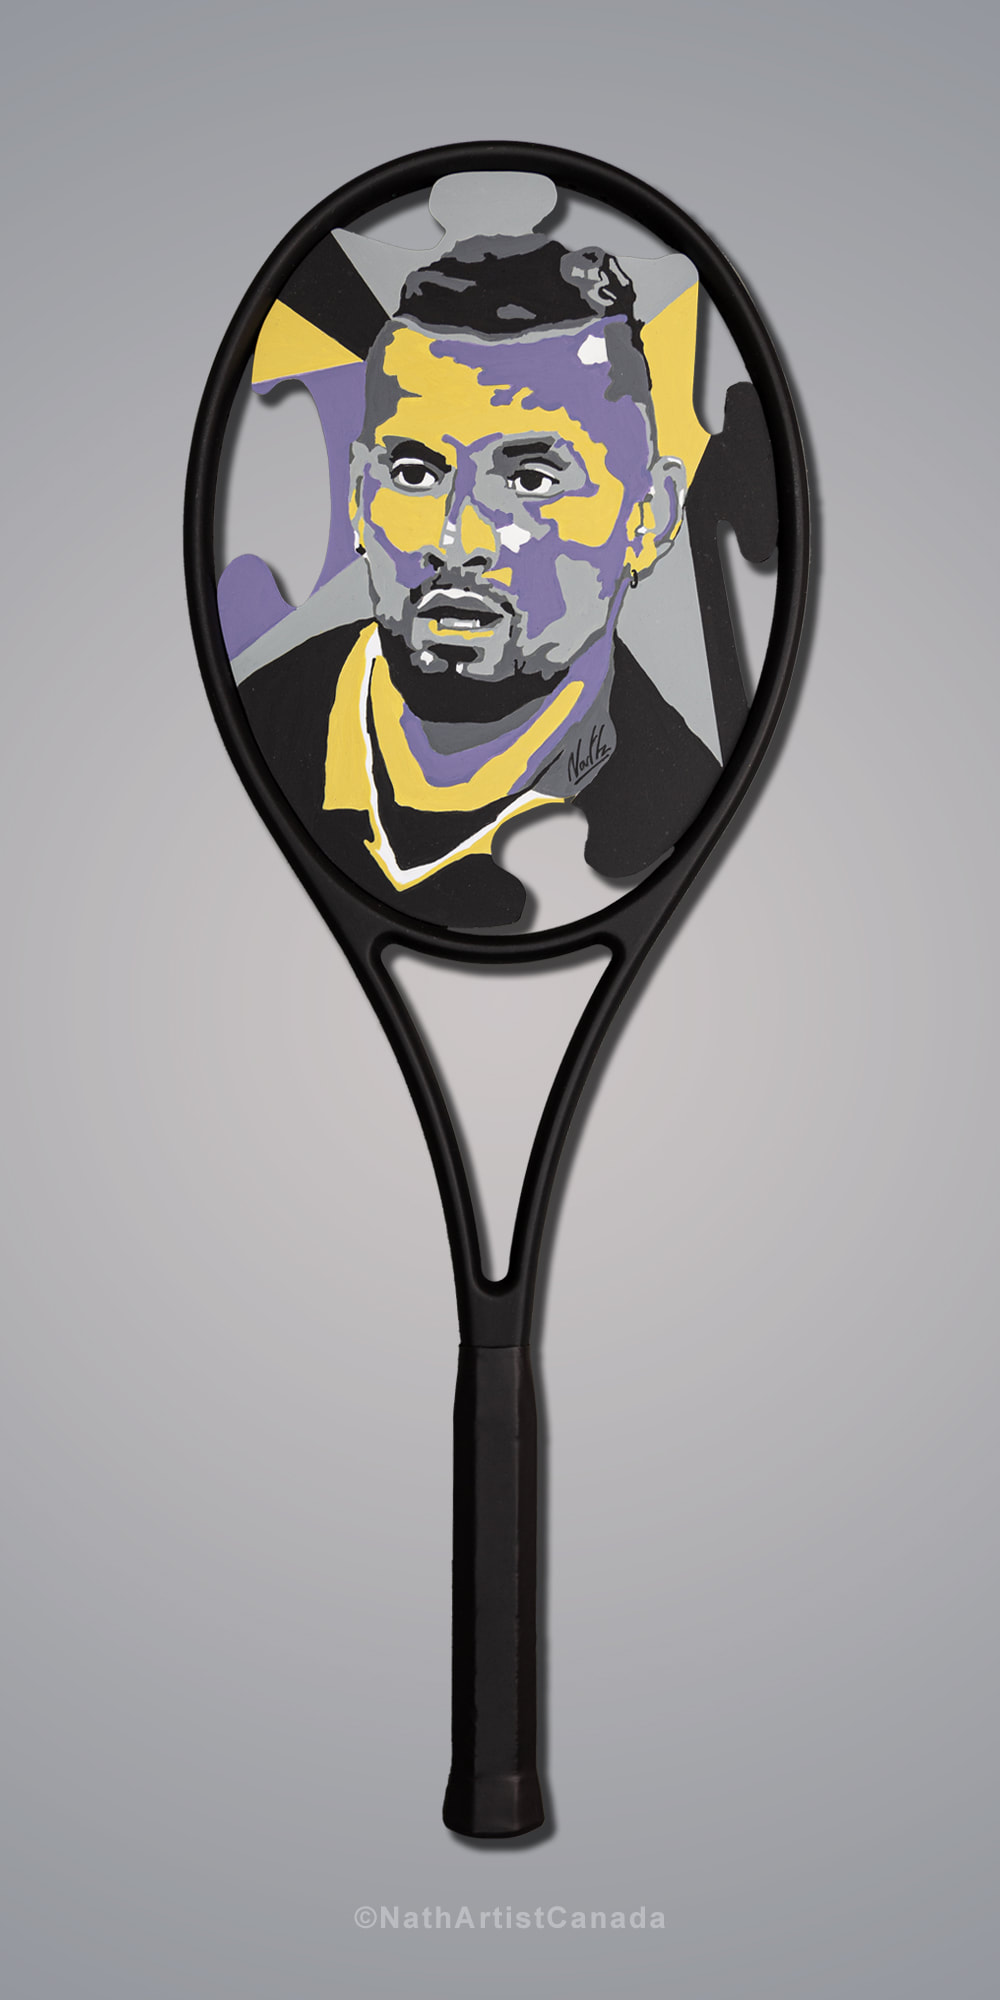 Nick Kyrgios Portraiture, Nath Artist Canada, Tennis fan gift, Tennis Collection, ATP tour player